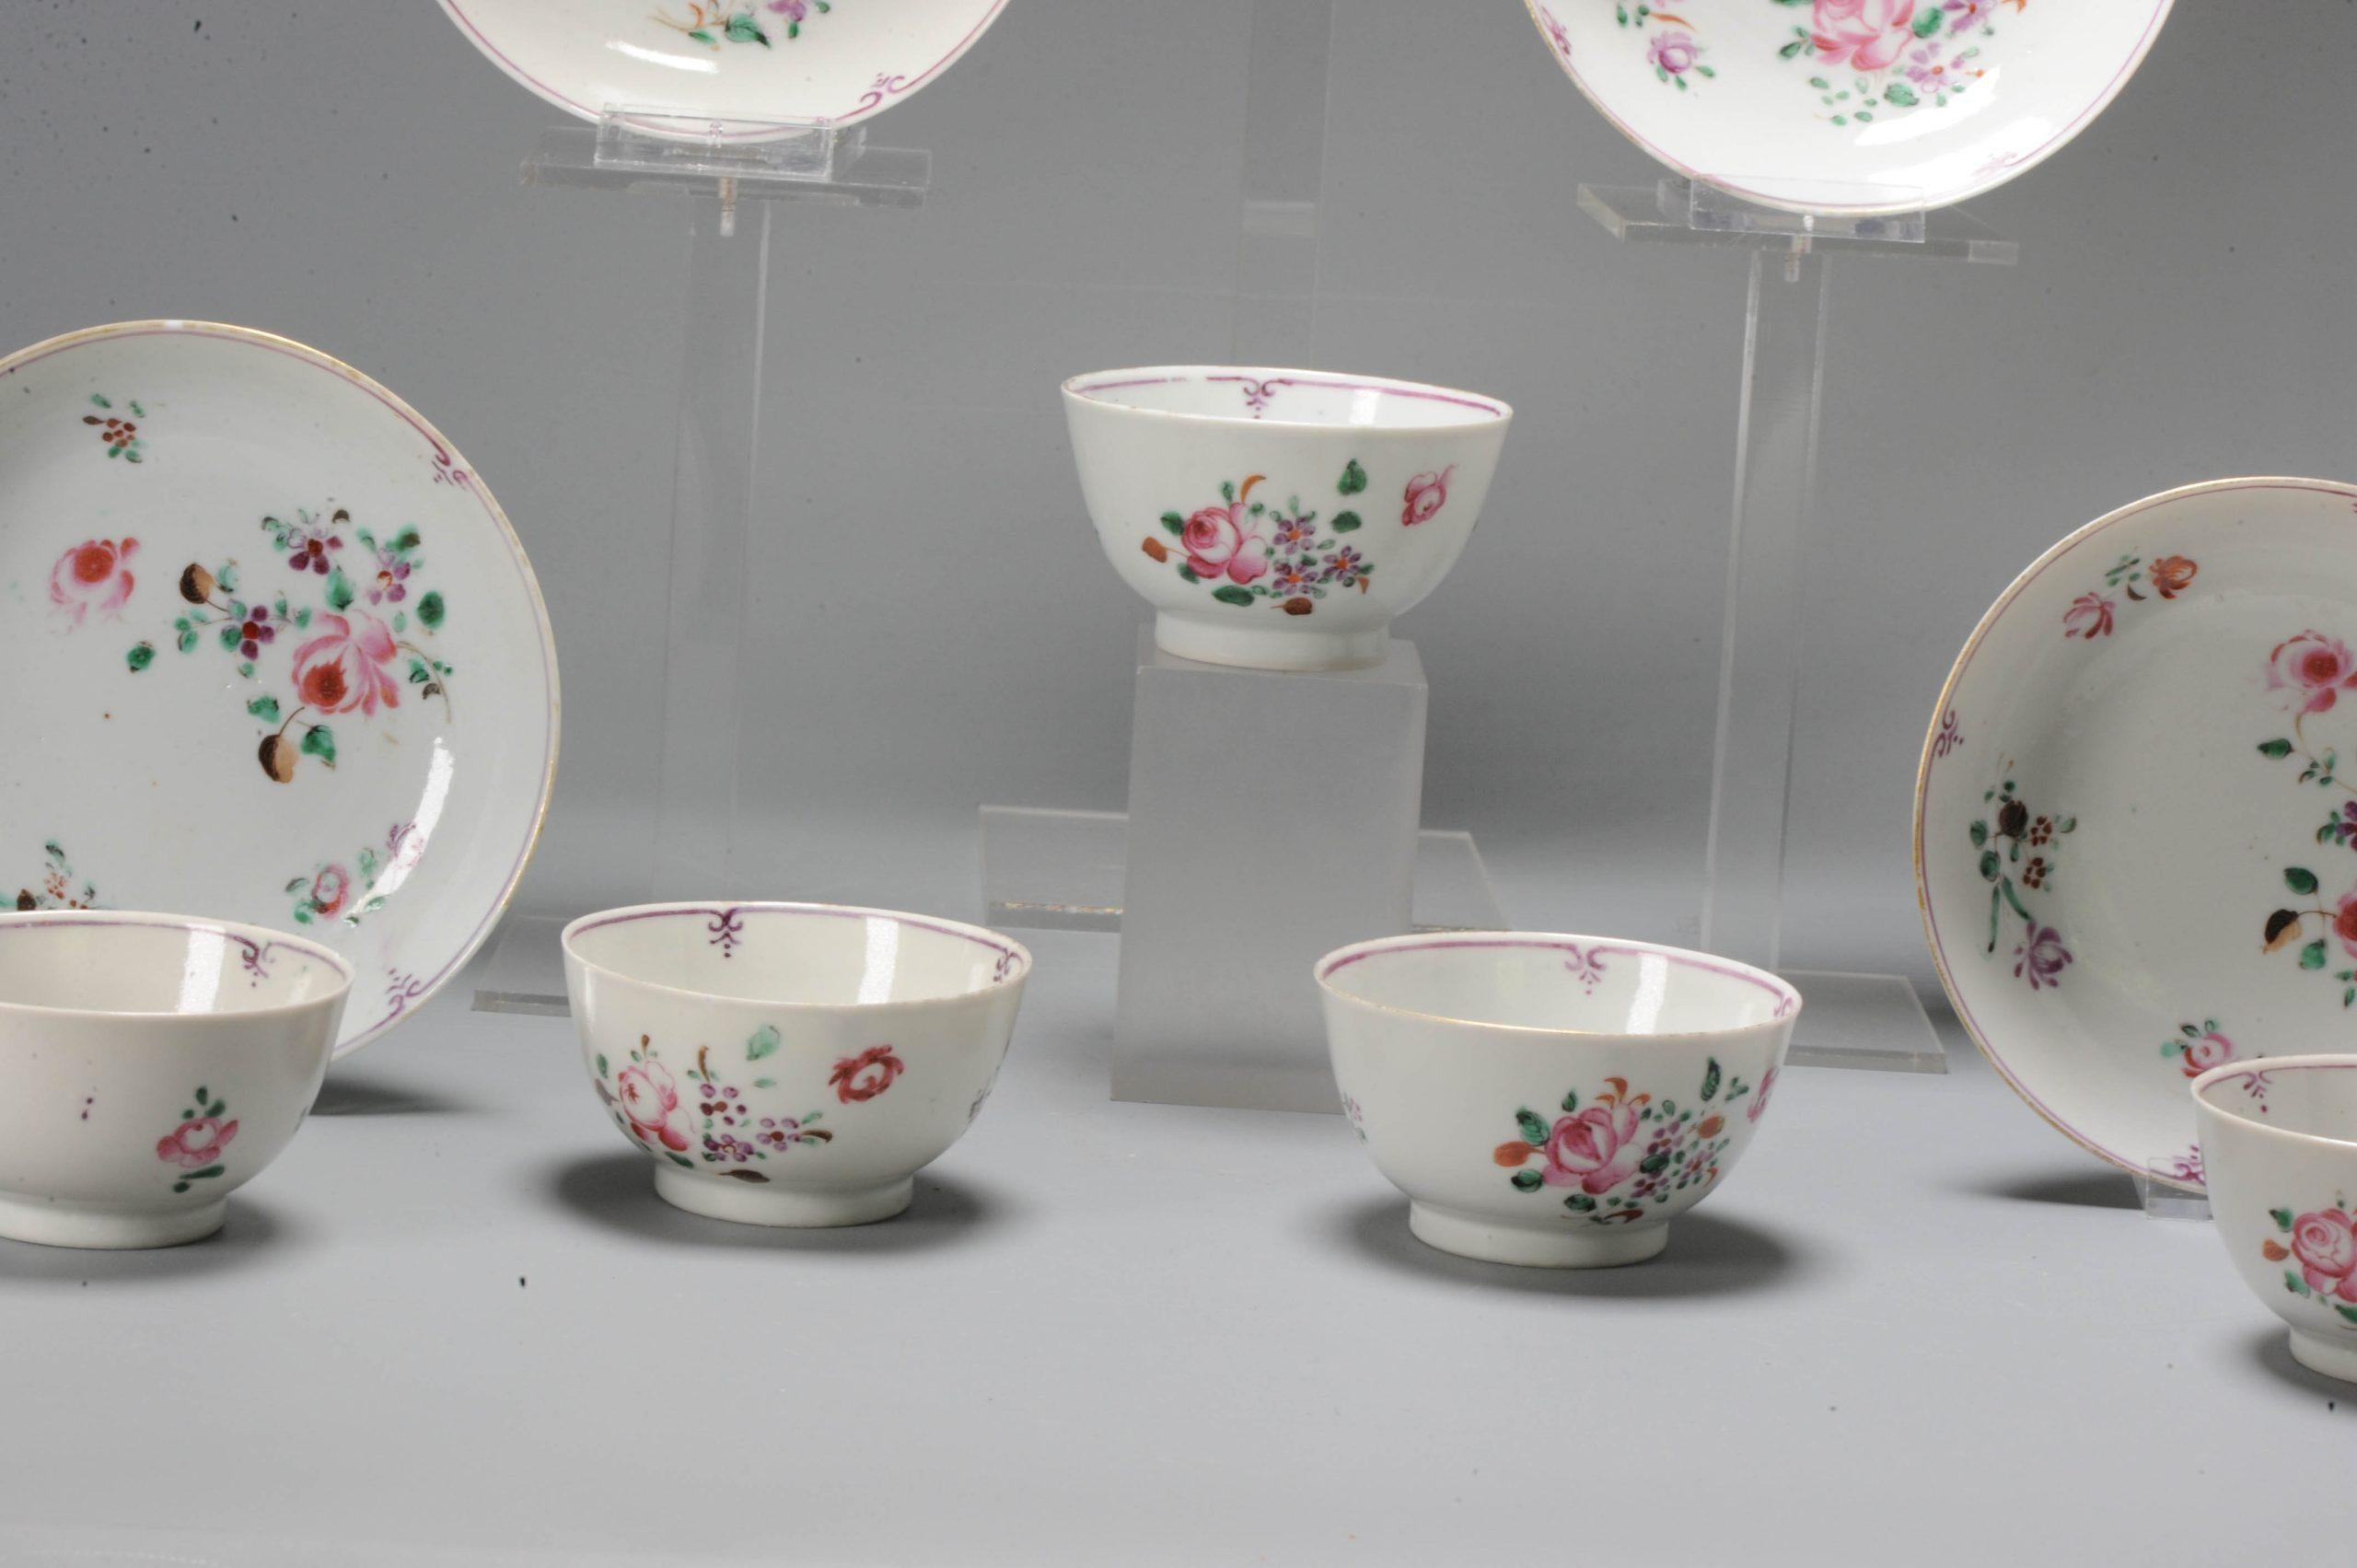 Set of 5 Tea Bowls with Dish Qianlong Period Chinese Porcelain Plates In Good Condition For Sale In Amsterdam, Noord Holland